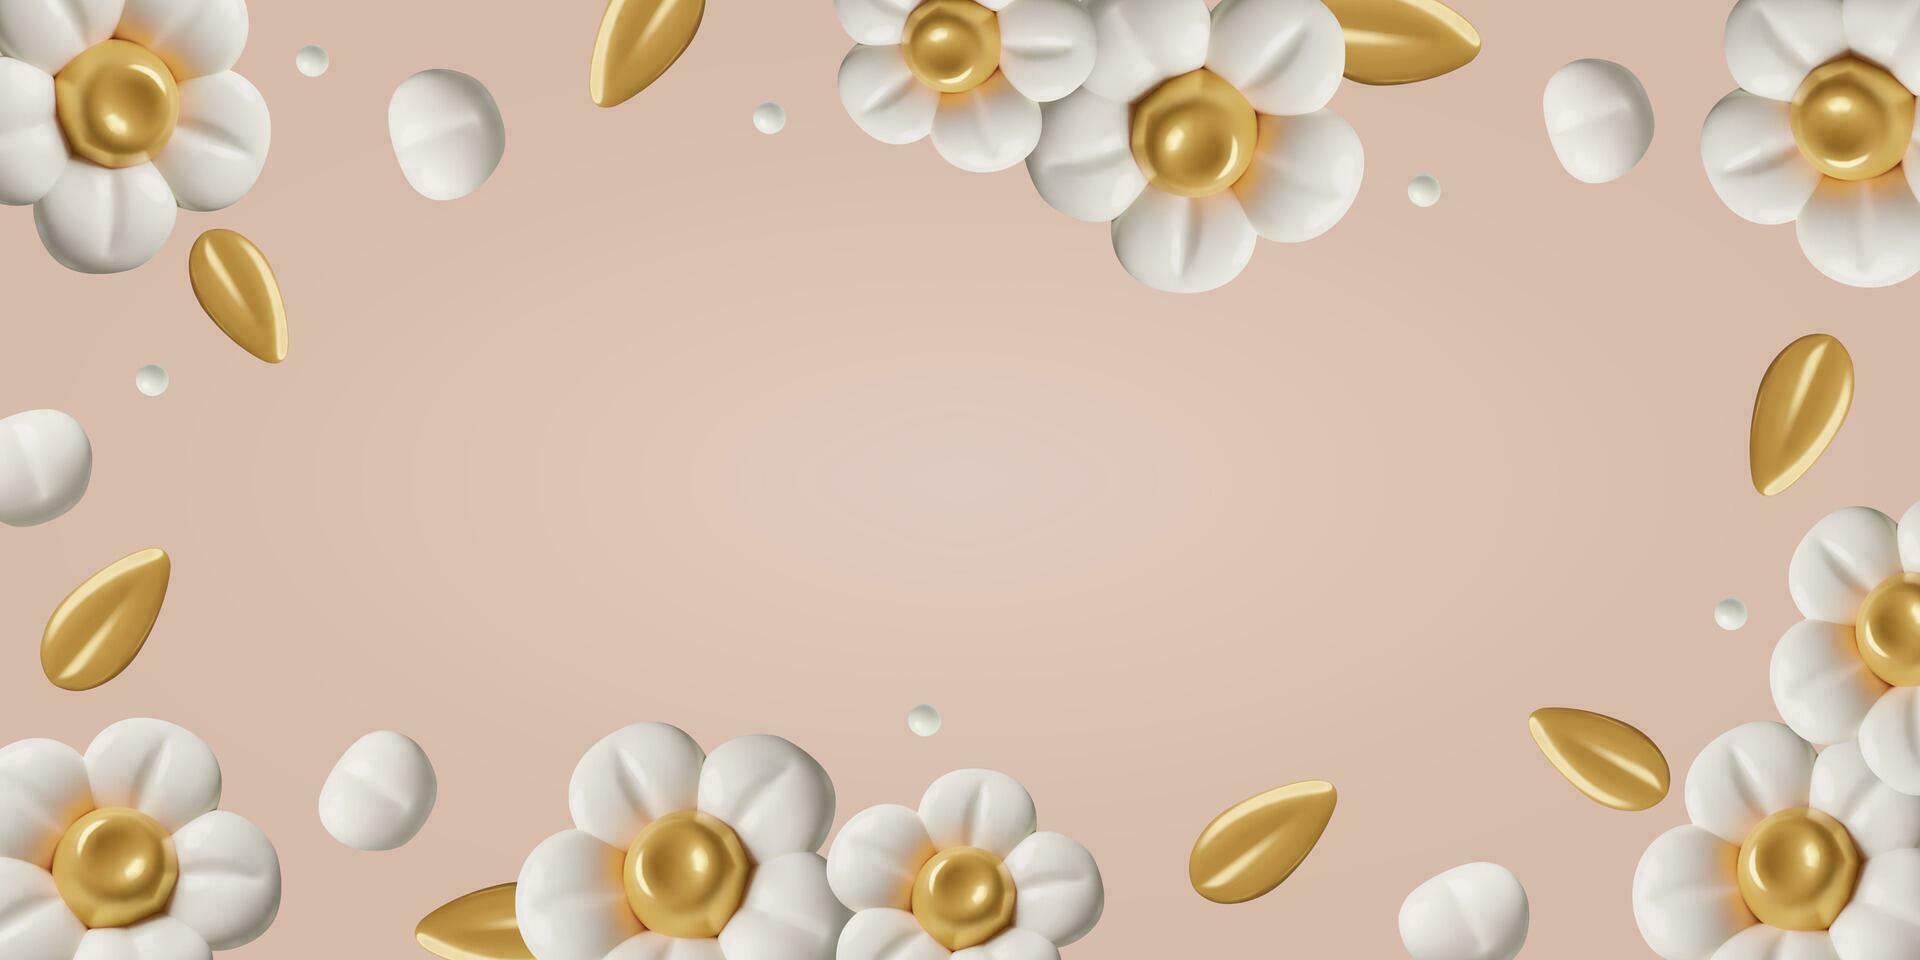 3D white flowers and gold leaves on peach color background Spring floral banner with copy space vector